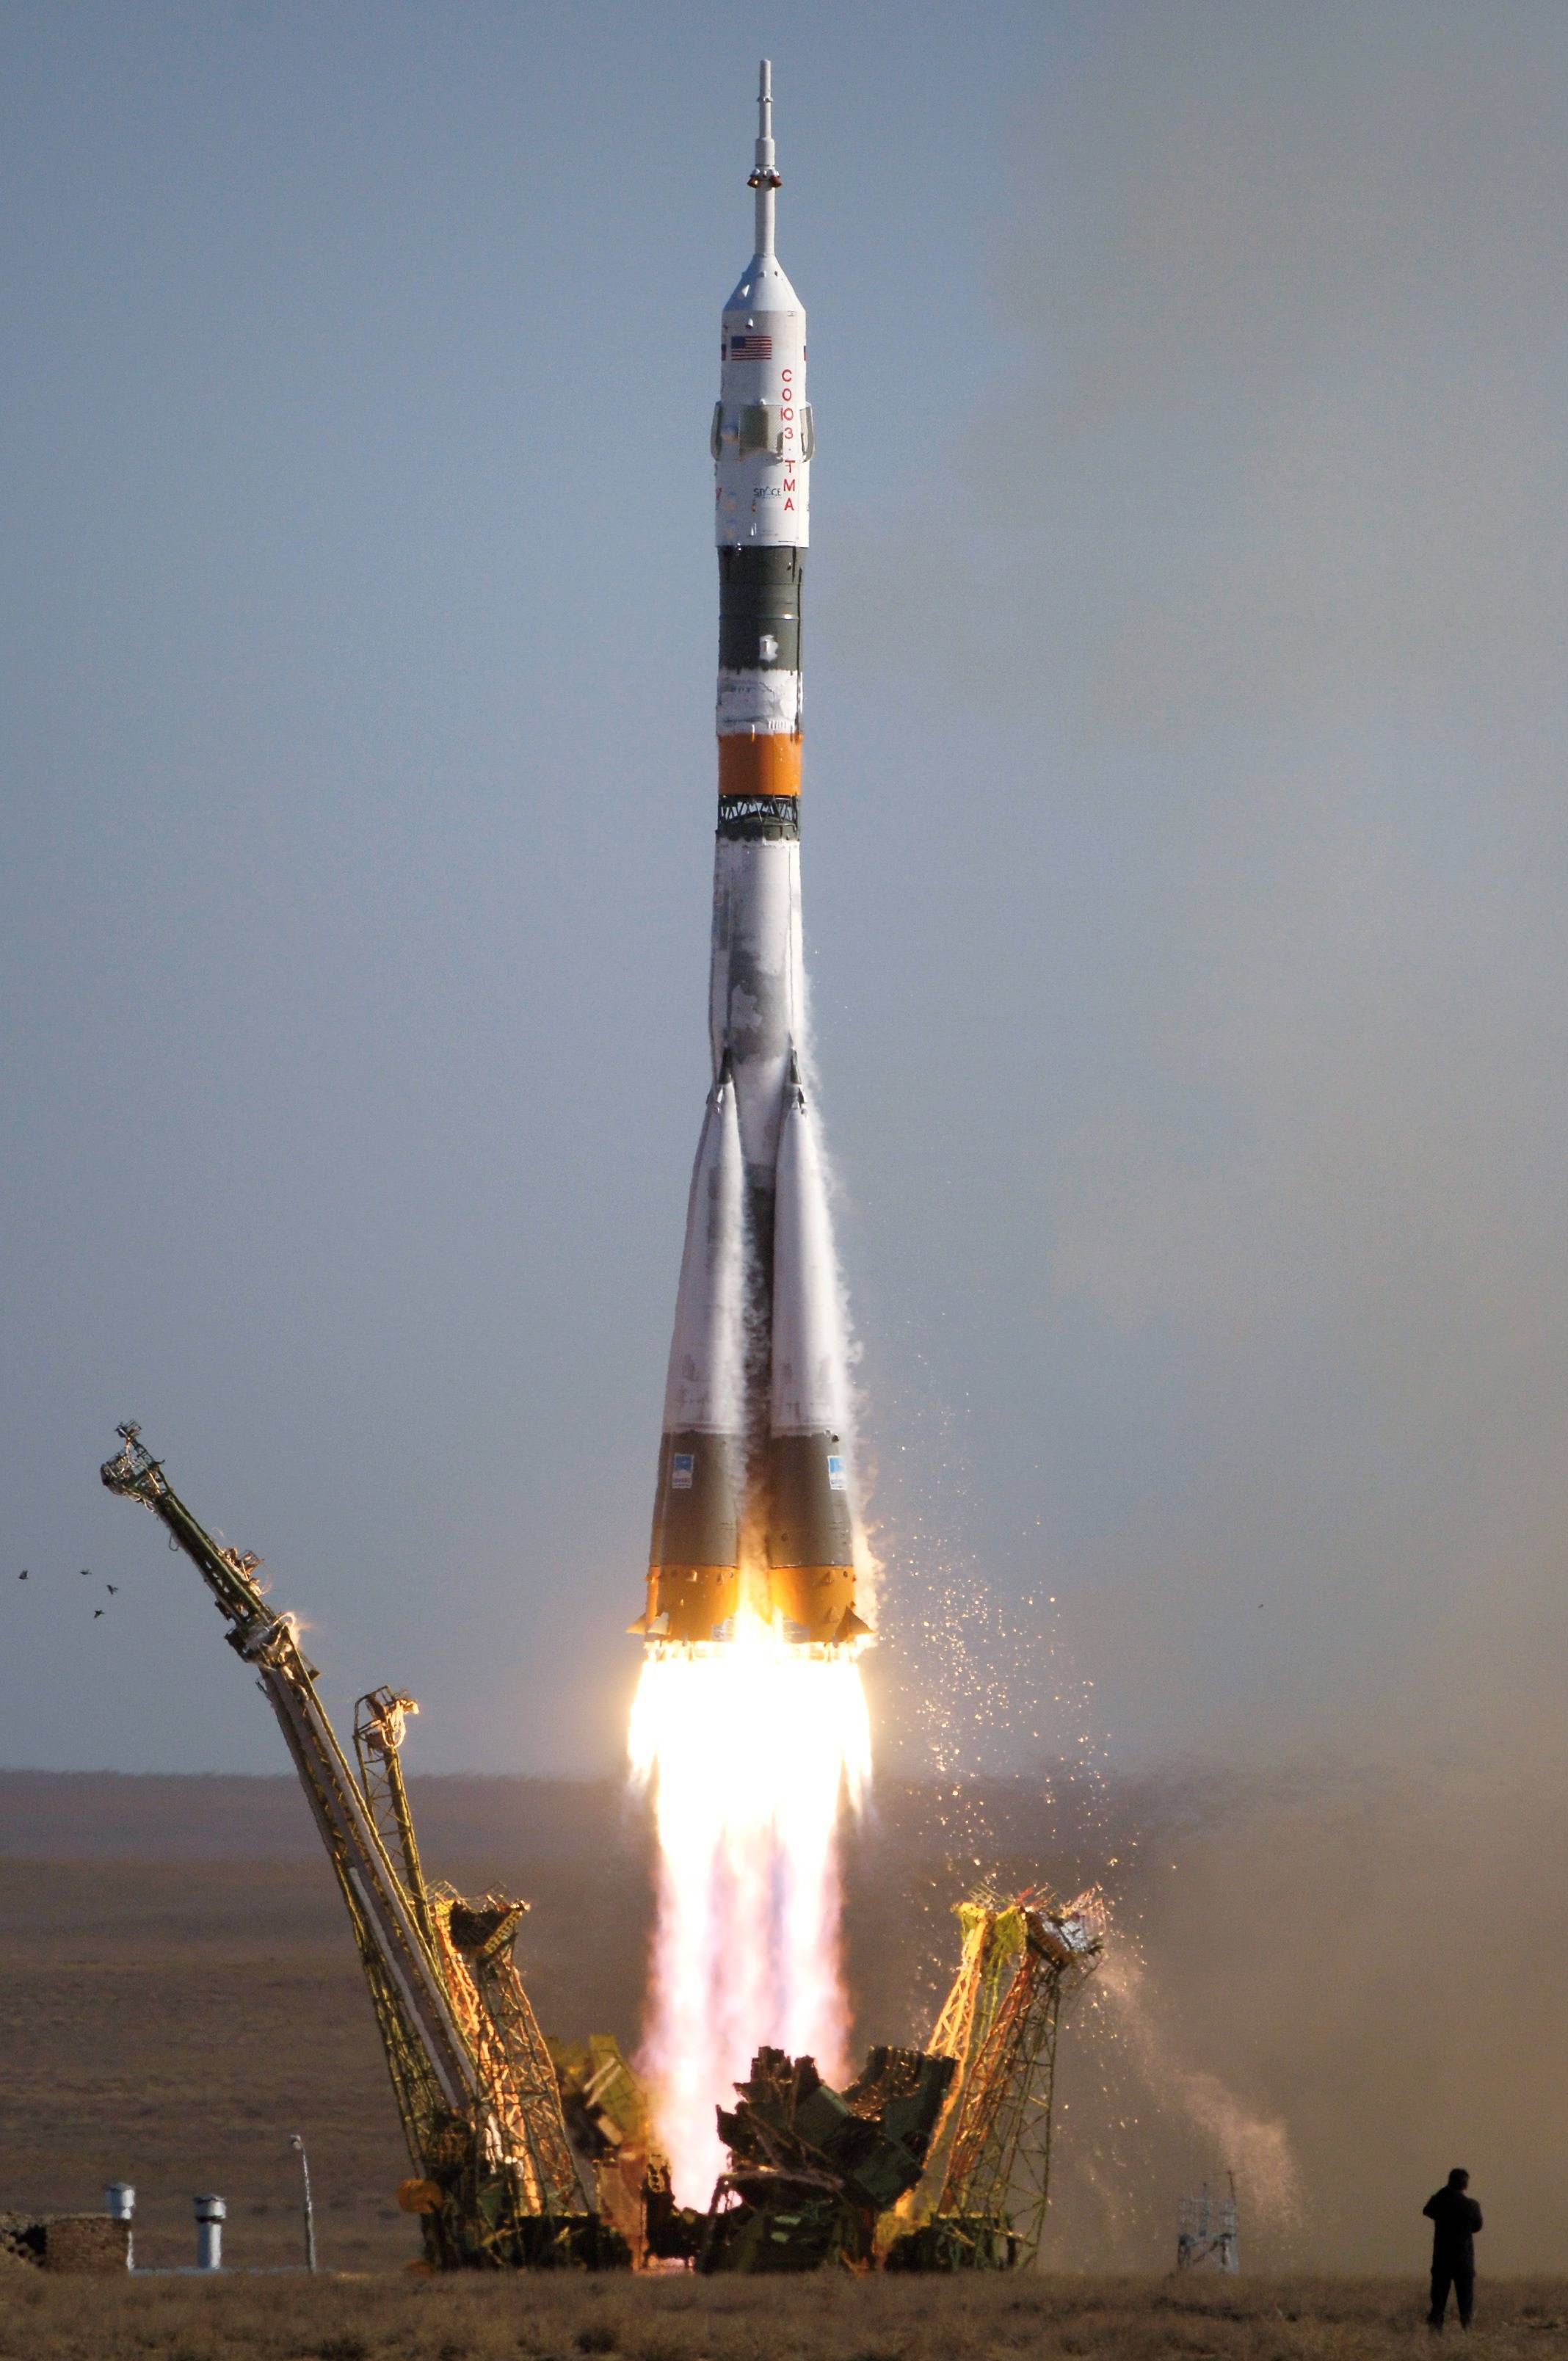 progress - Why are Soyuz rockets painted with different colors ...